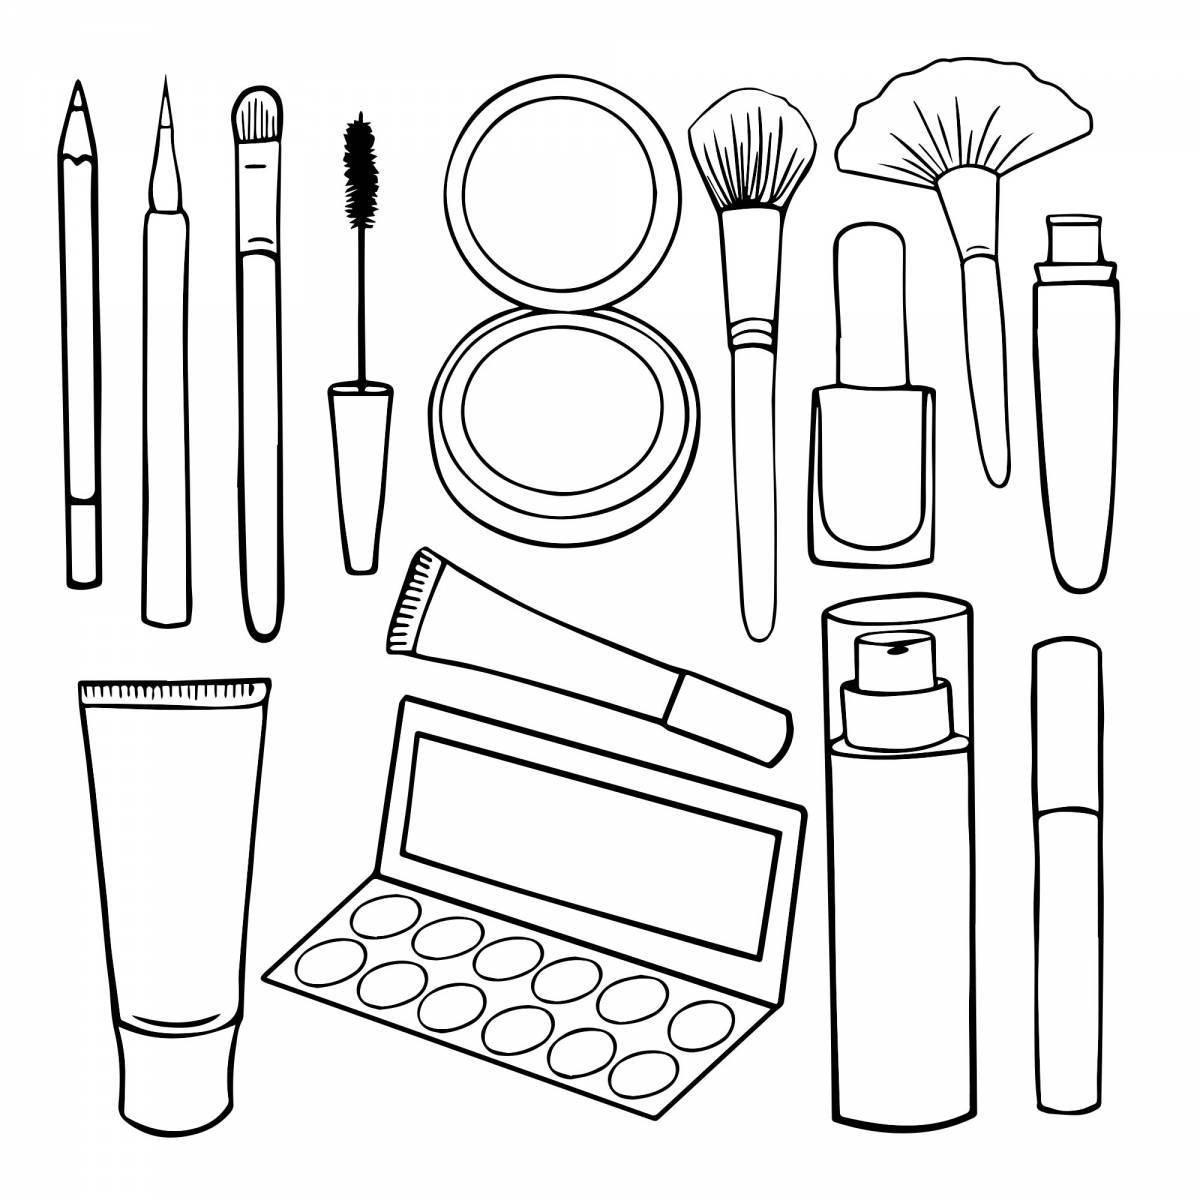 Coloring page striking cosmetics